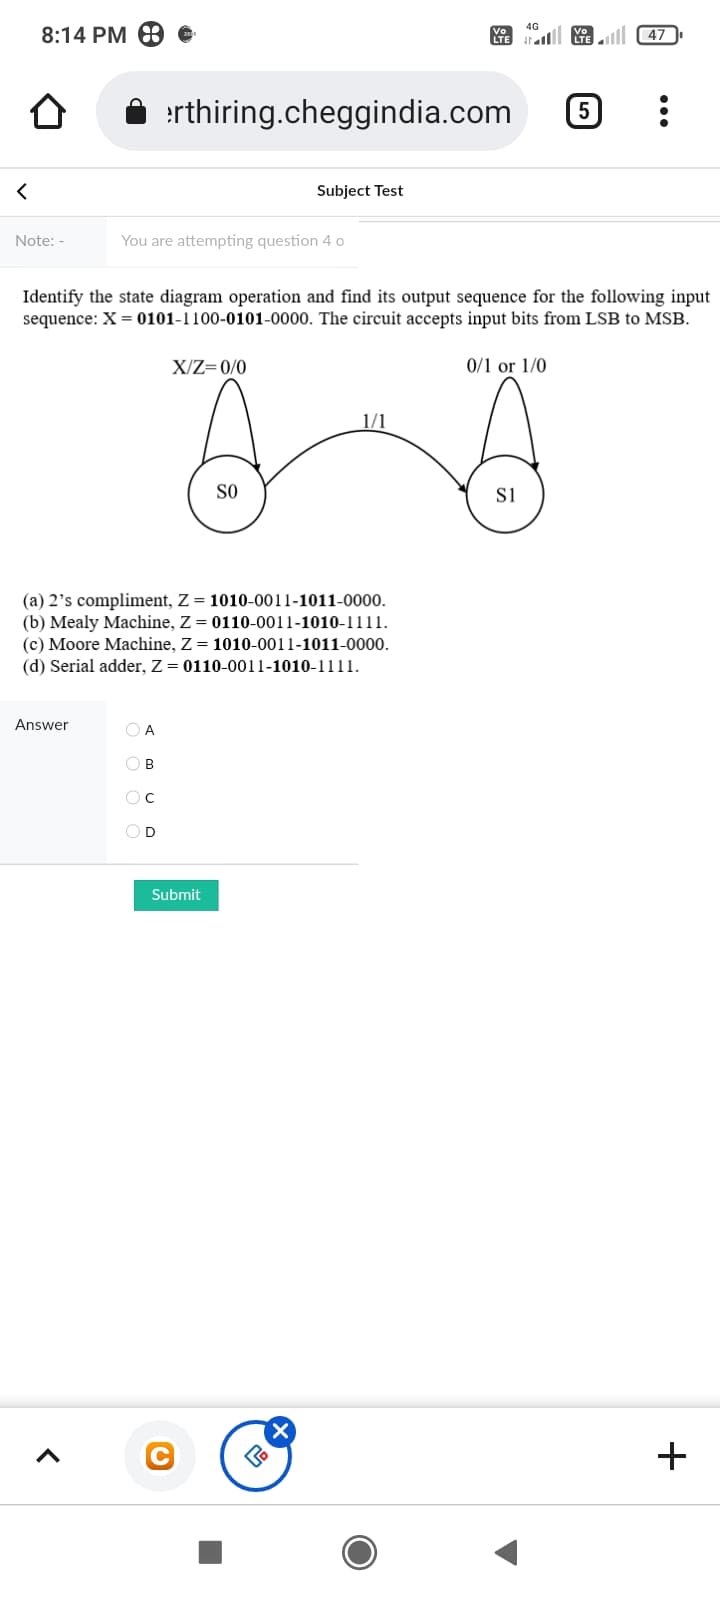 4G
8:14 PM
al Ke 47
rthiring.cheggindia.com
Subject Test
Note: -
You are attempting question 4 o
Identify the state diagram operation and find its output sequence for the following input
sequence: X = 0101-1100-0101-0000. The circuit accepts input bits from LSB to MSB.
X/Z=0/0
0/1 or 1/0
1/1
SO
si
(a) 2's compliment, Z= 1010-0011-1011-0000.
(b) Mealy Machine, Z = 0110-0011-1010-1111.
(c) Moore Machine, Z= 1010-0011-1011-0000.
(d) Serial adder, Z= 0110-0011-1010-1111.
Answer
O A
O B
OD
Submit
+
...
